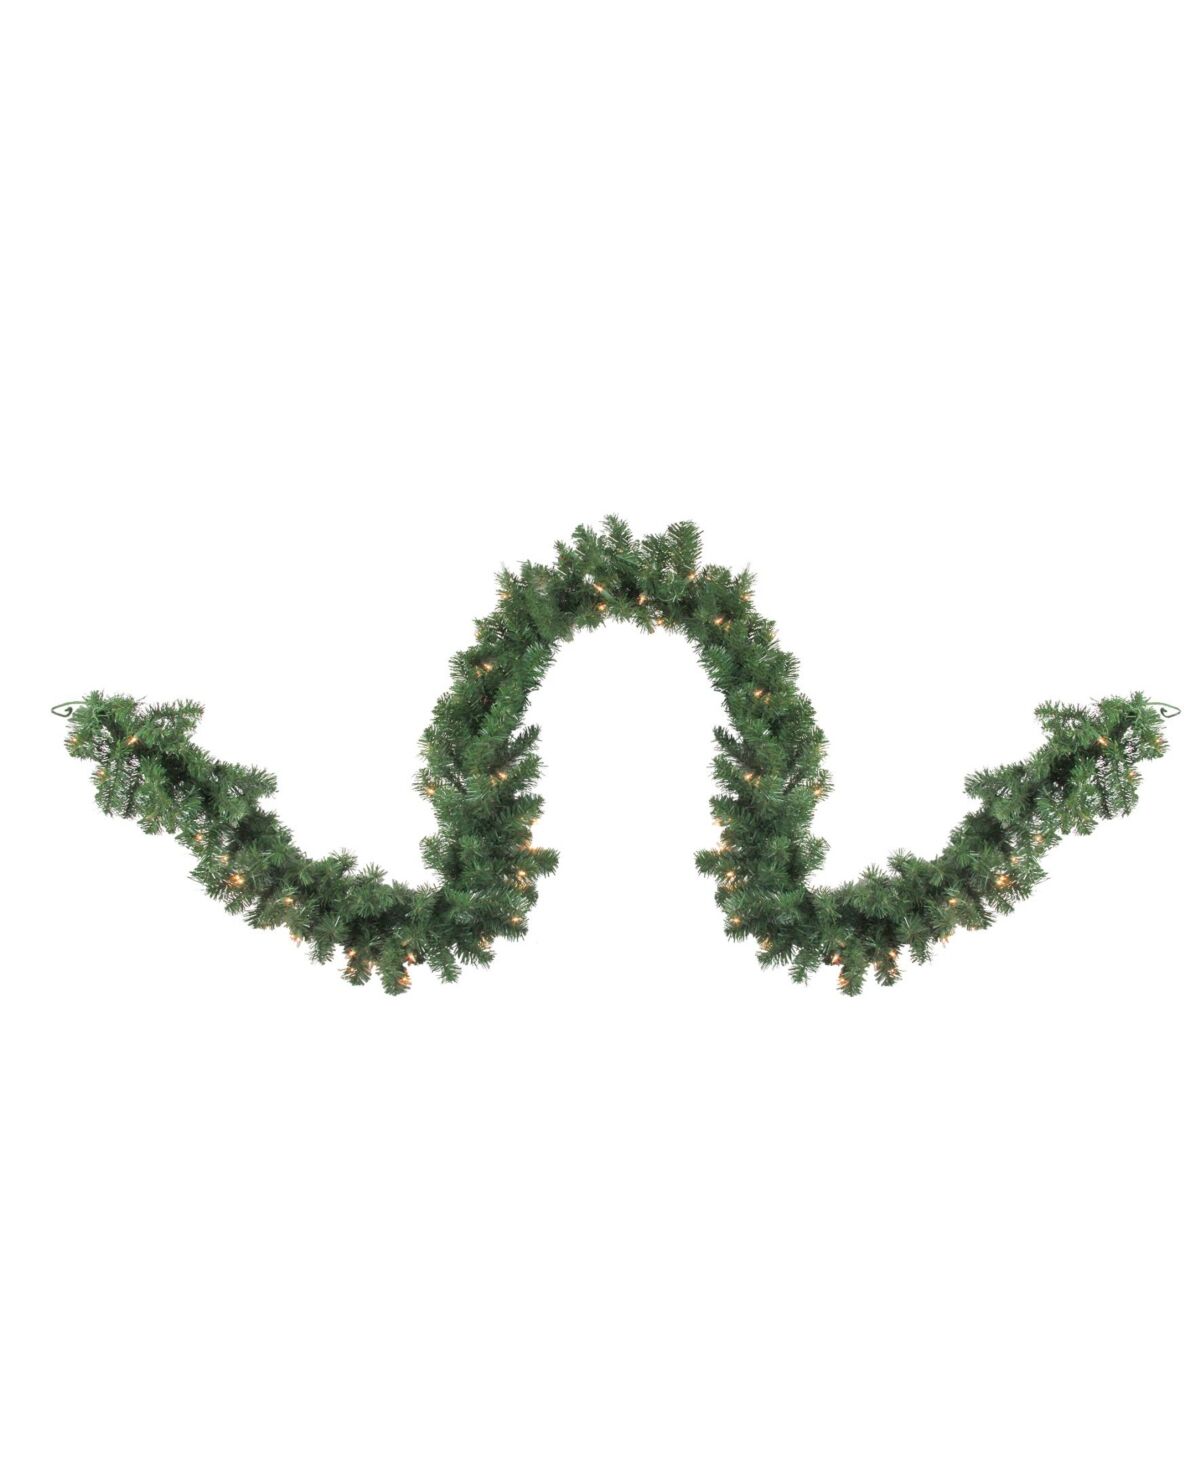 Northlight 9' Pre-Lit Deluxe Windsor Green Pine Christmas Garland - Clear Lights - Green